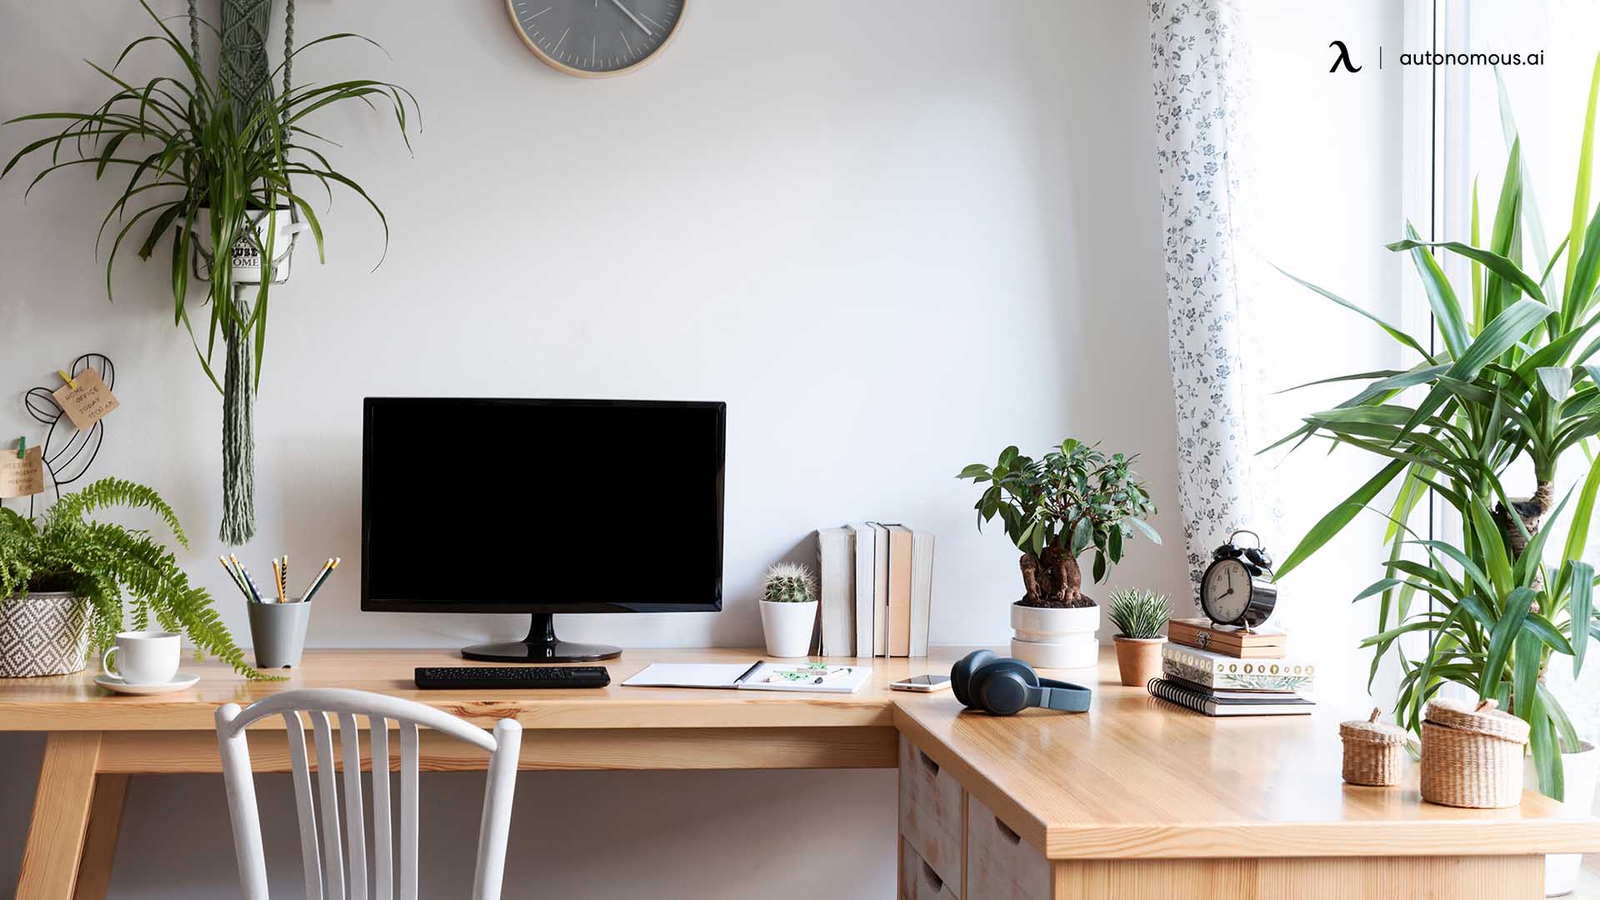 The 10 Best L-Shaped Desks for Your Home Office That You’ll Love (2021 Reviews)